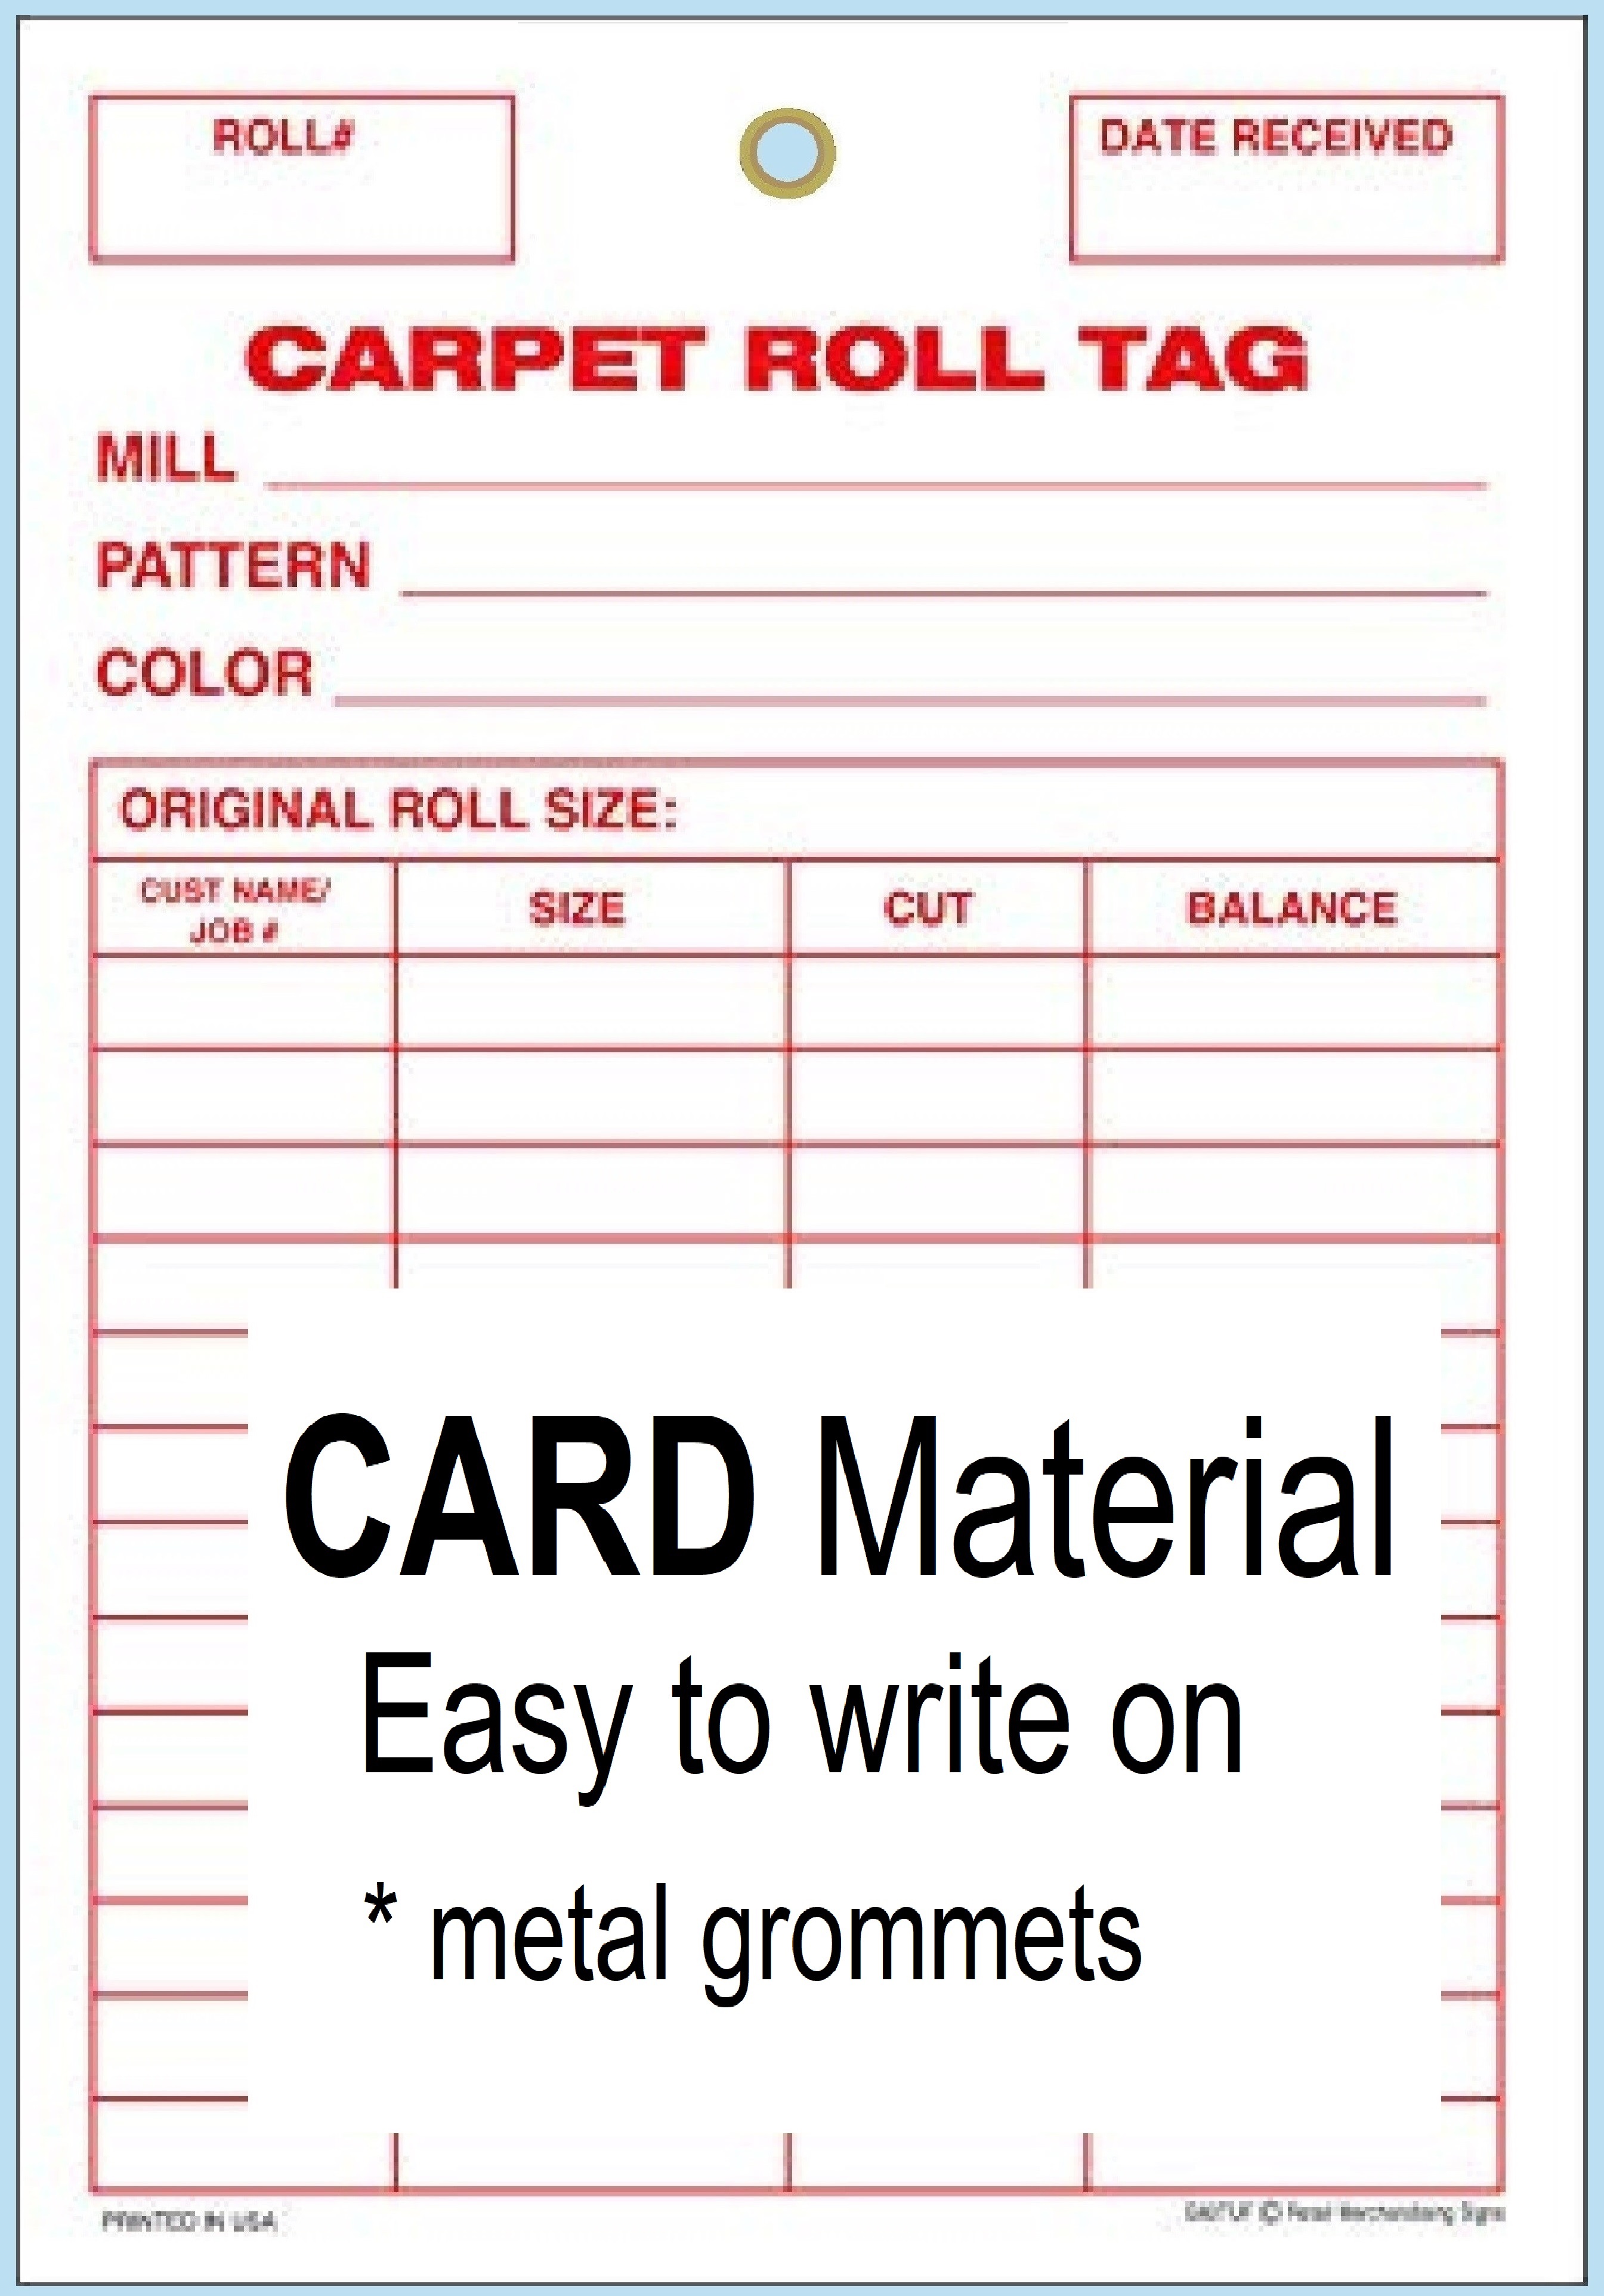 G60TUF Carpet Roll Inventory Tag Carpet Grommet 5in x 7in 100 pack